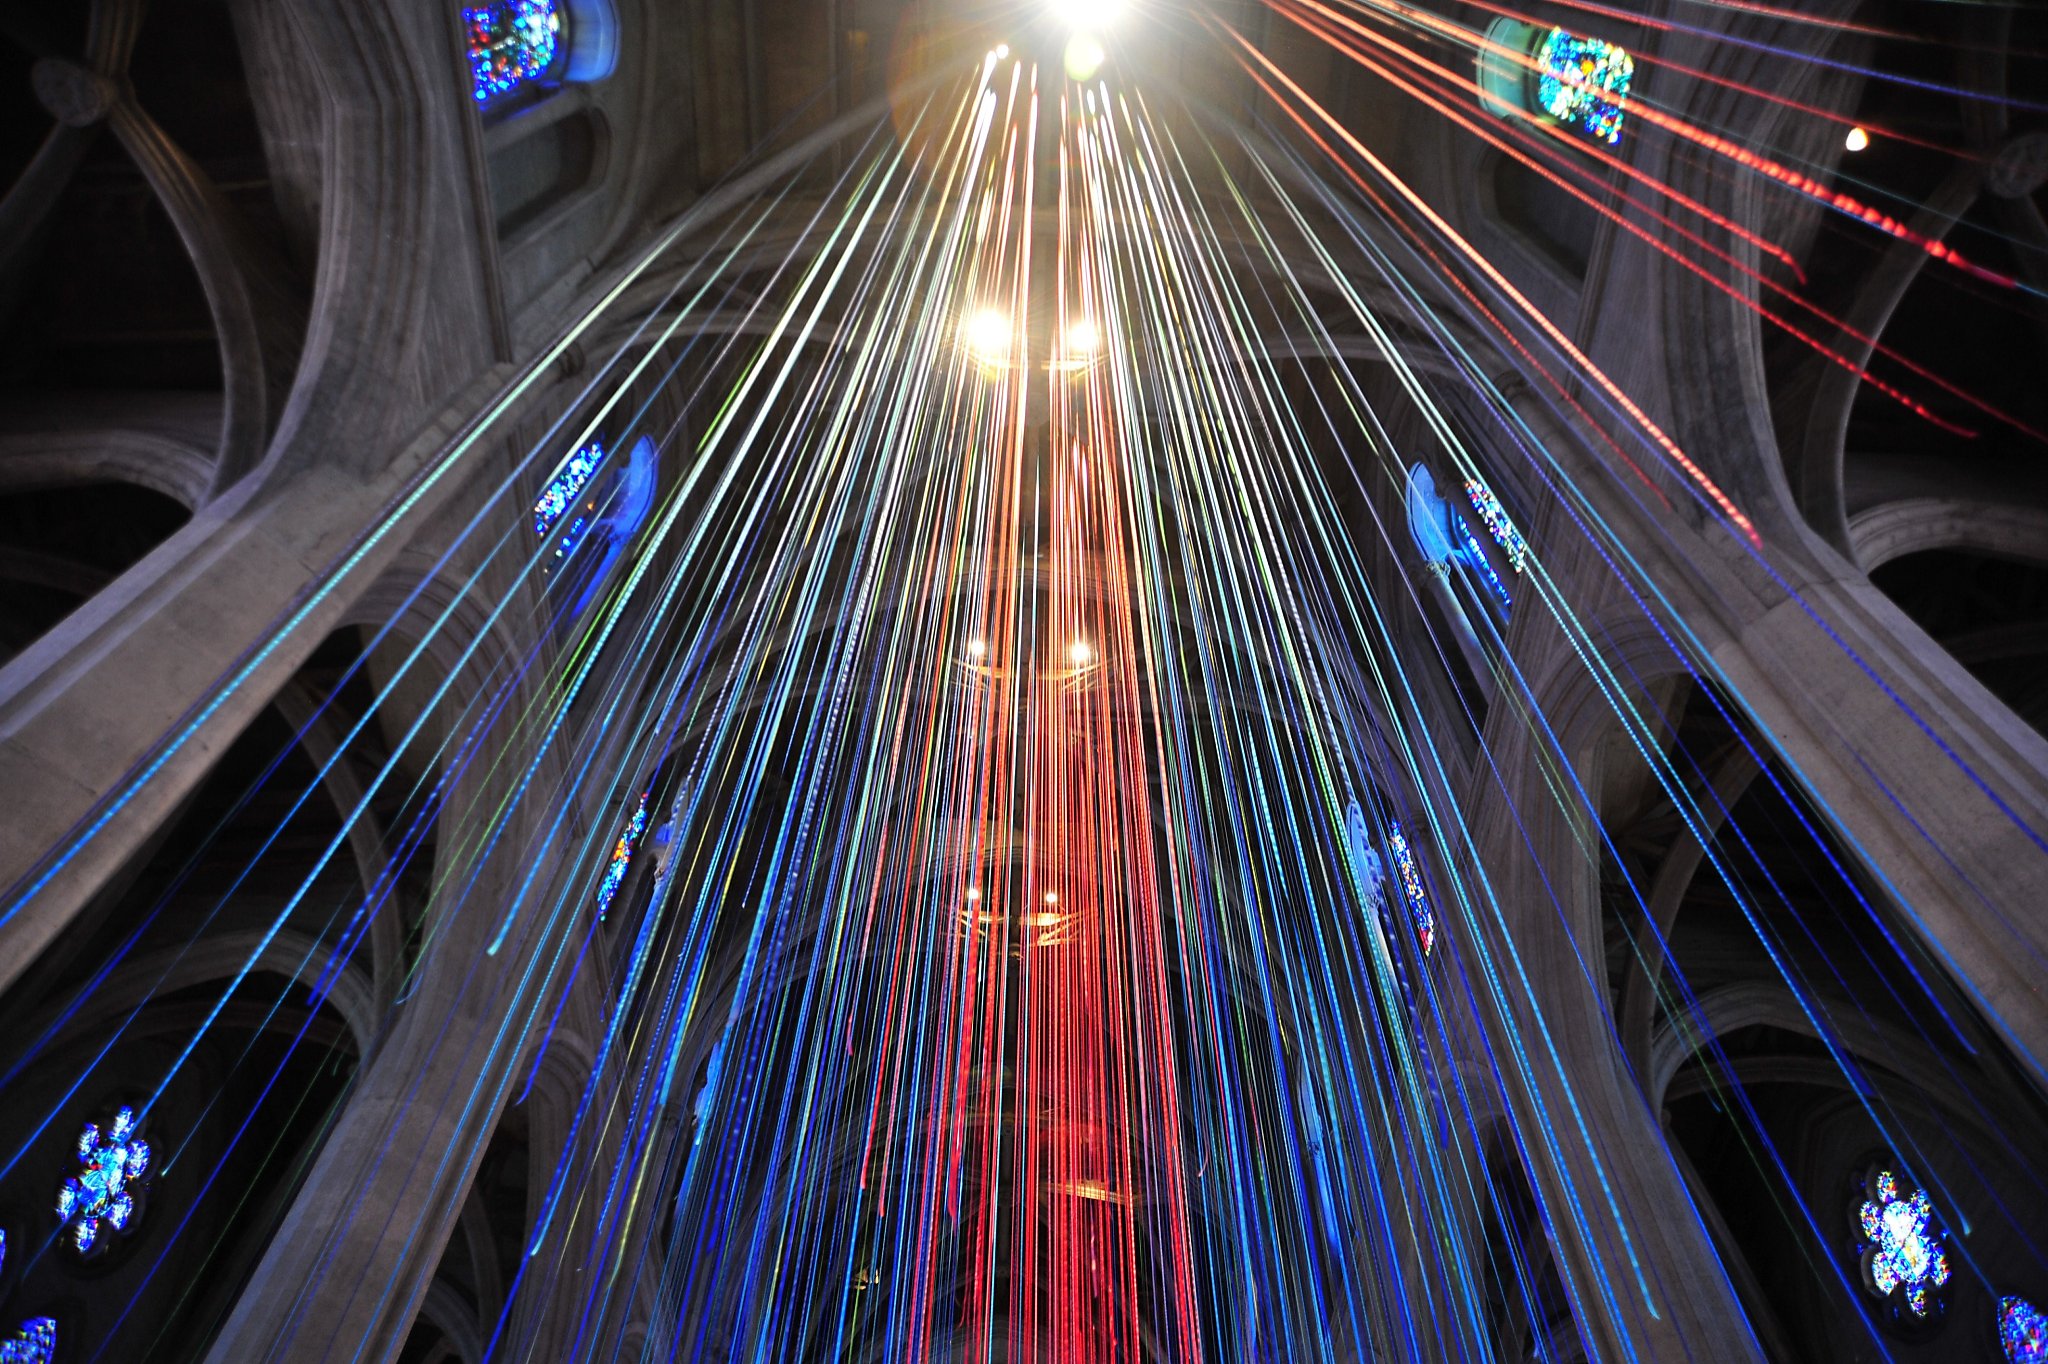 'Graced With Light' art installation has 20 miles of ribbons - SFGate2048 x 1364